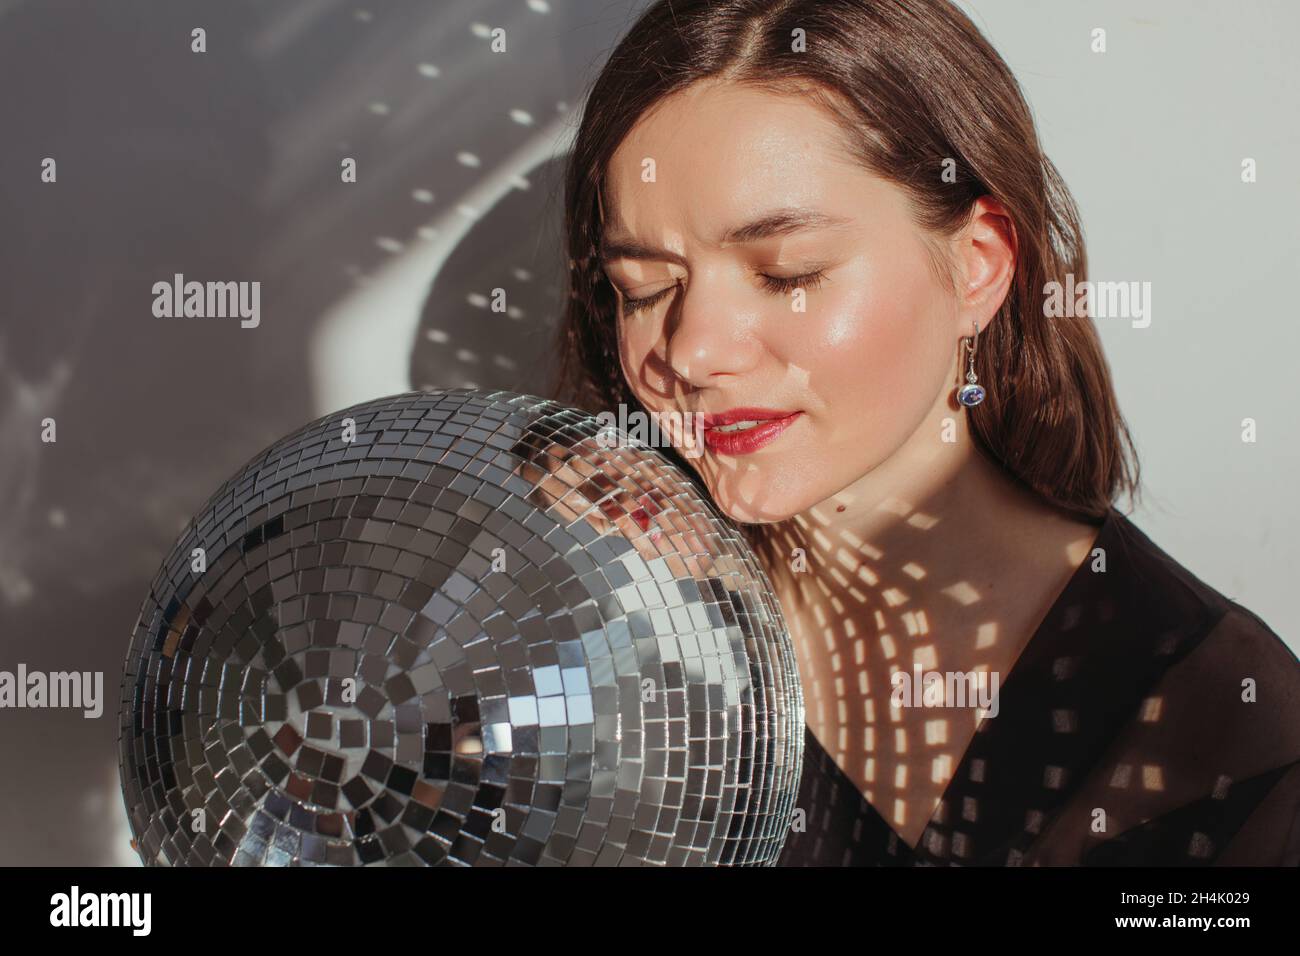 Portrait of a woman with closed eyes holding a glitter ball Stock Photo